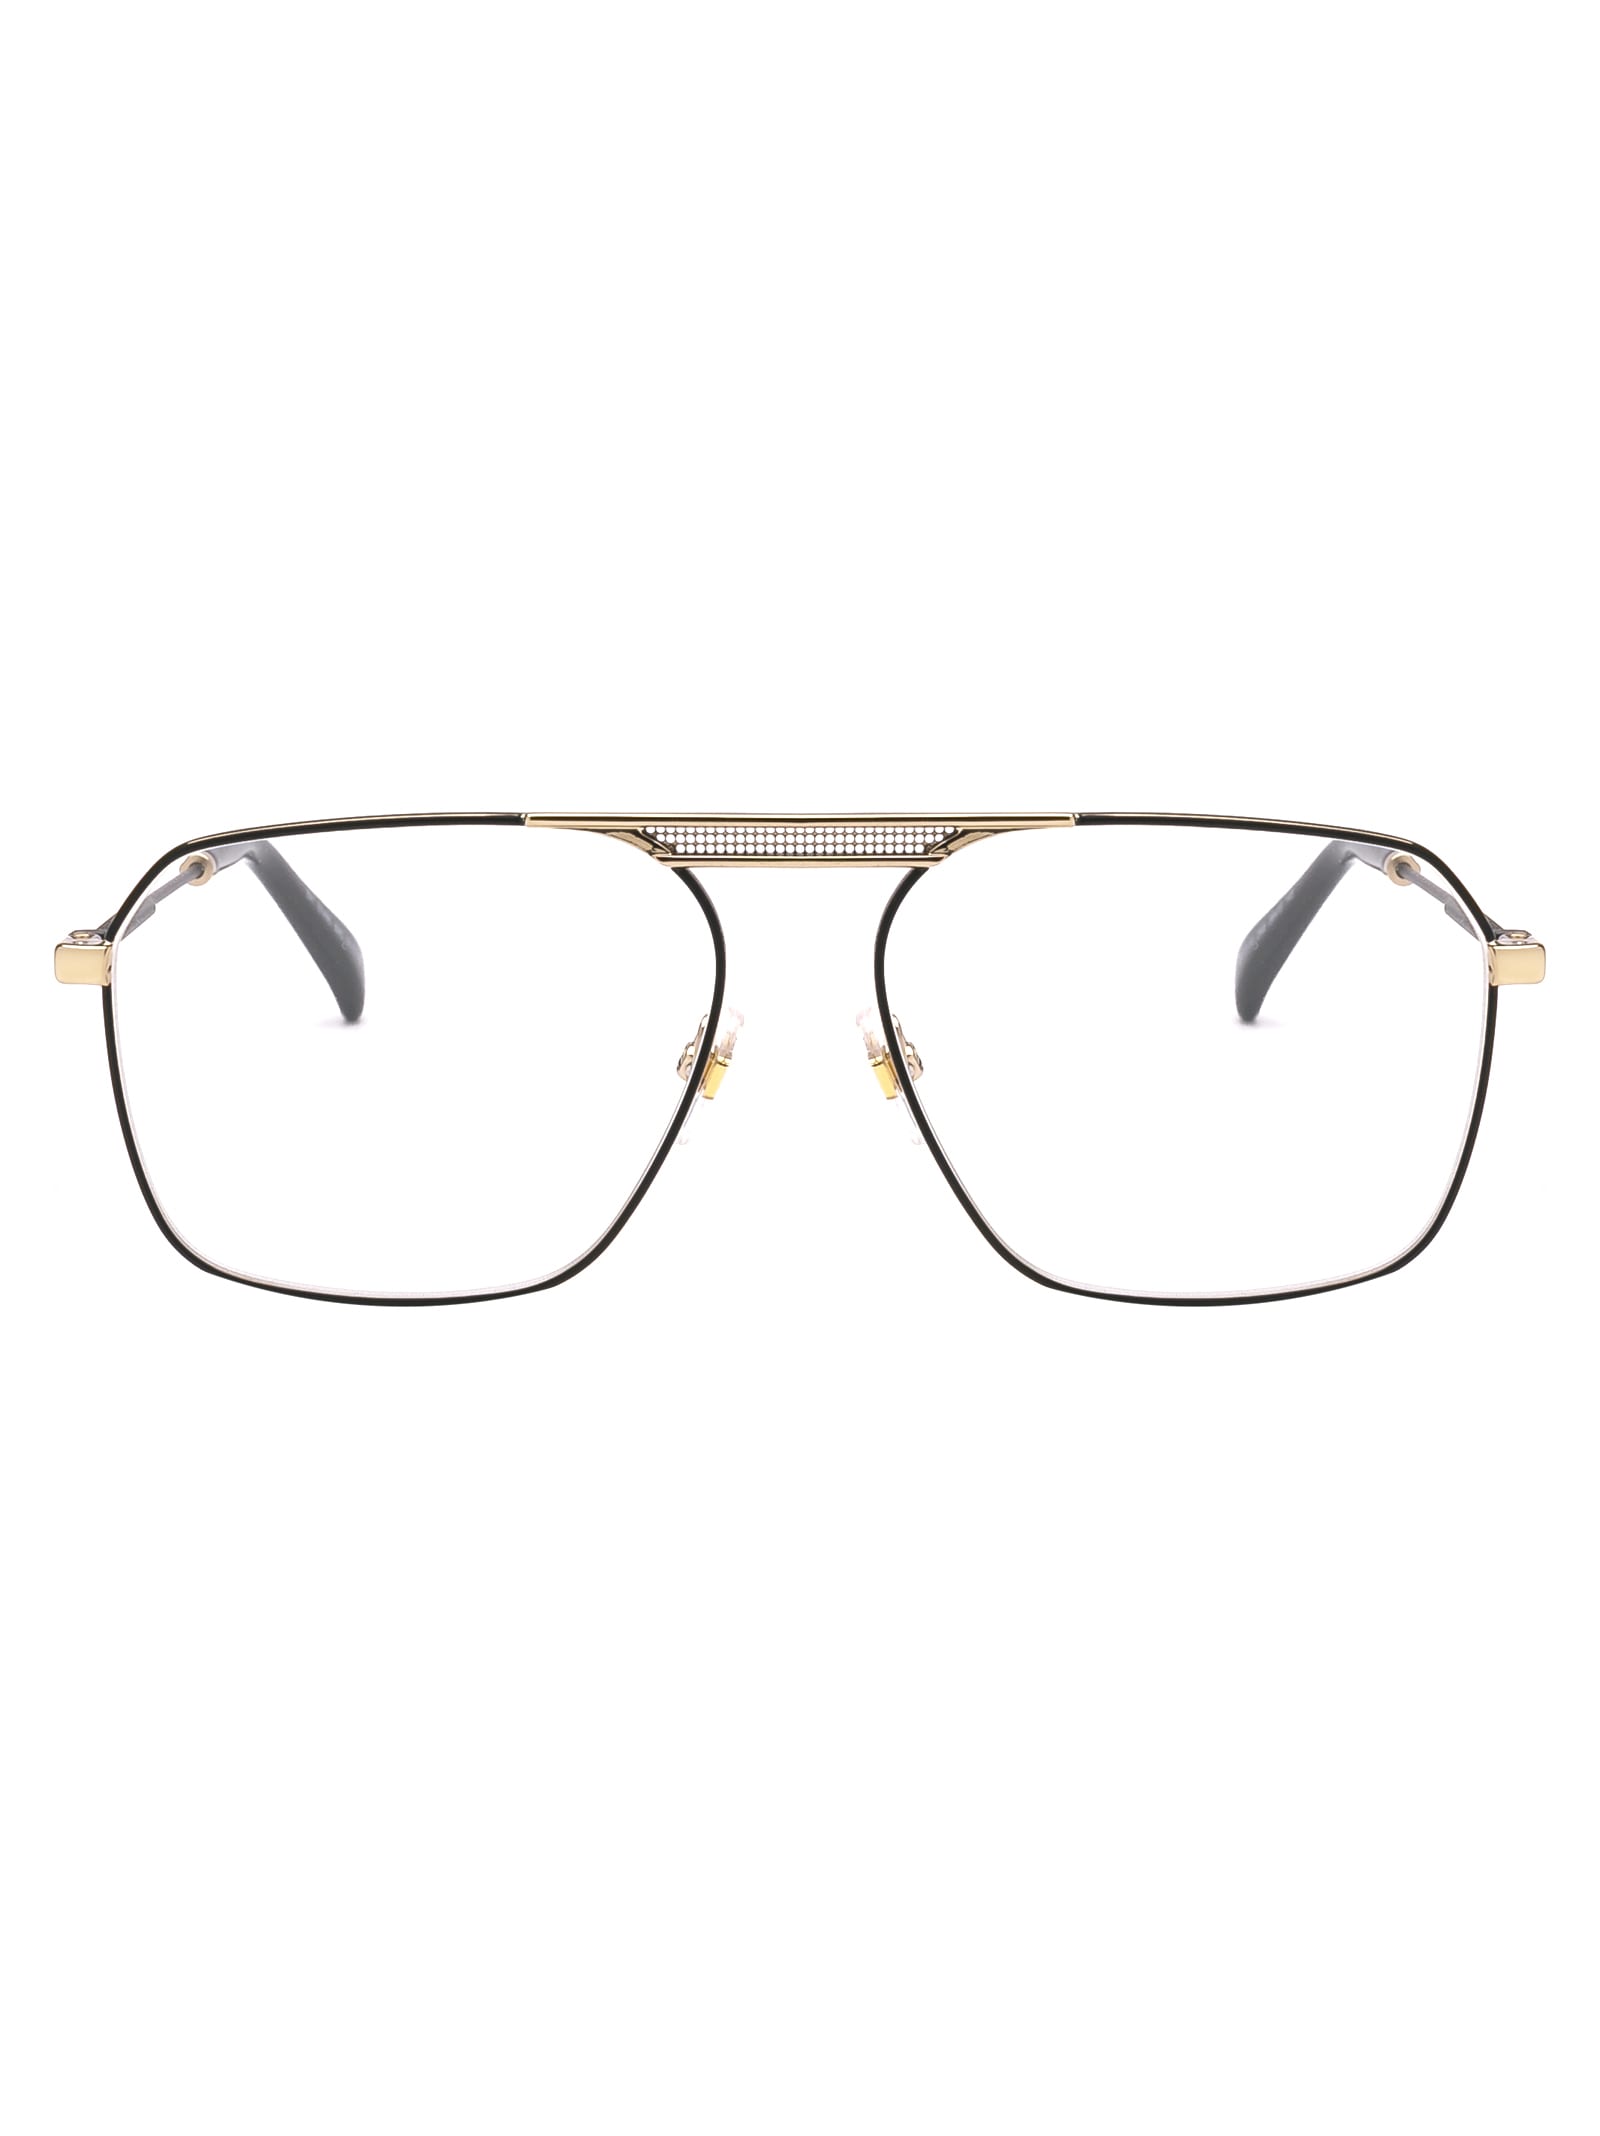 Givenchy Gv 0118 Glasses In 2m2 Blk Gold B